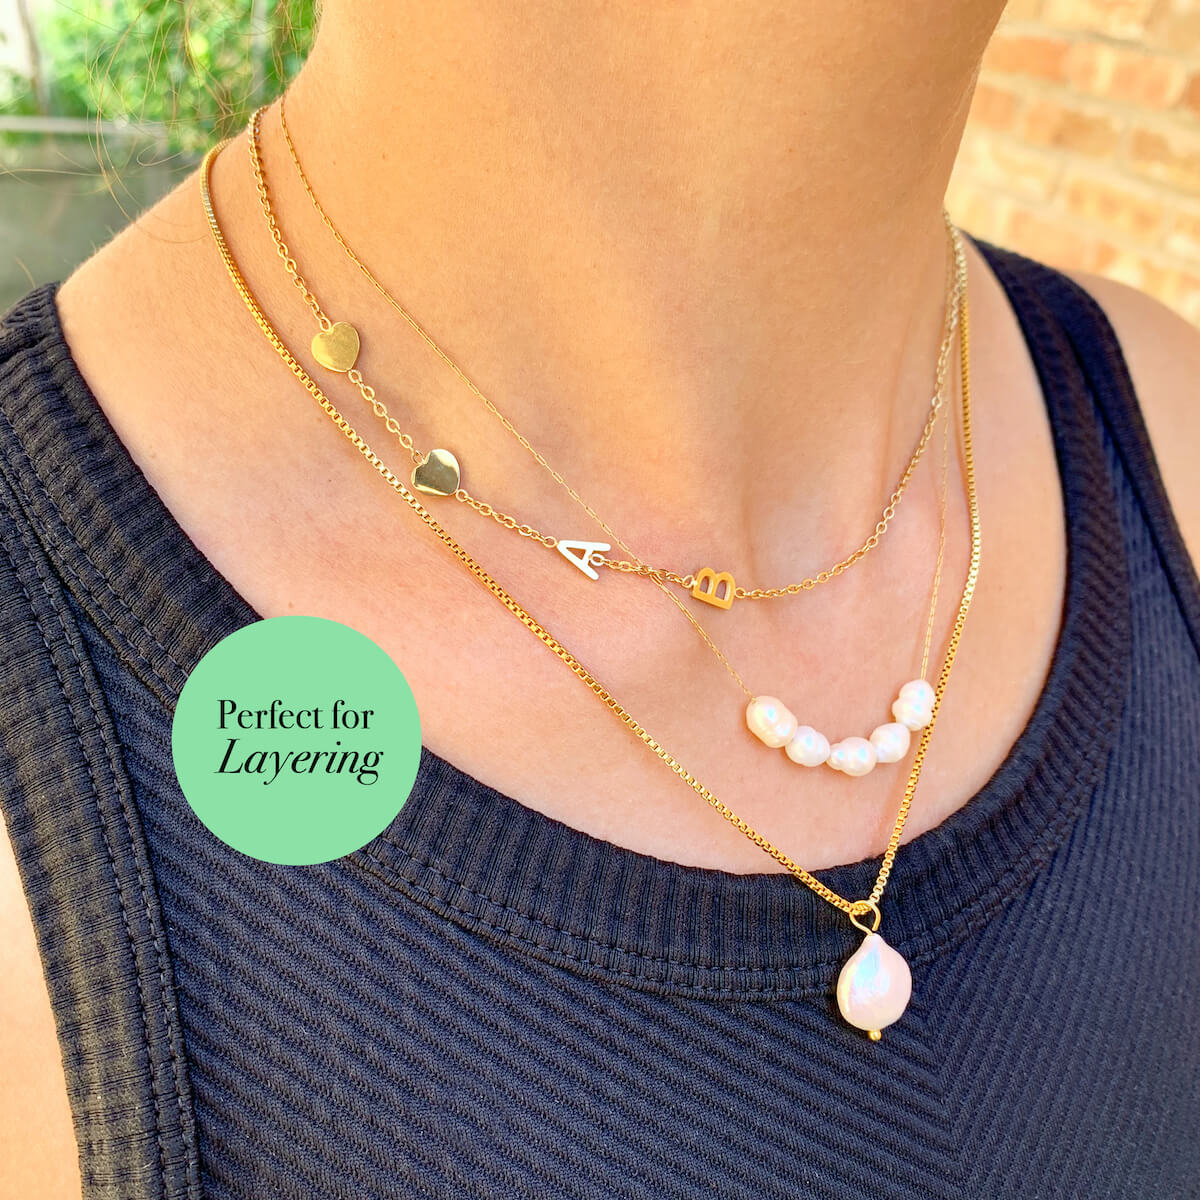 Louis Vuitton Gold Tone Love Letters Timeless Layered Necklace Louis Vuitton